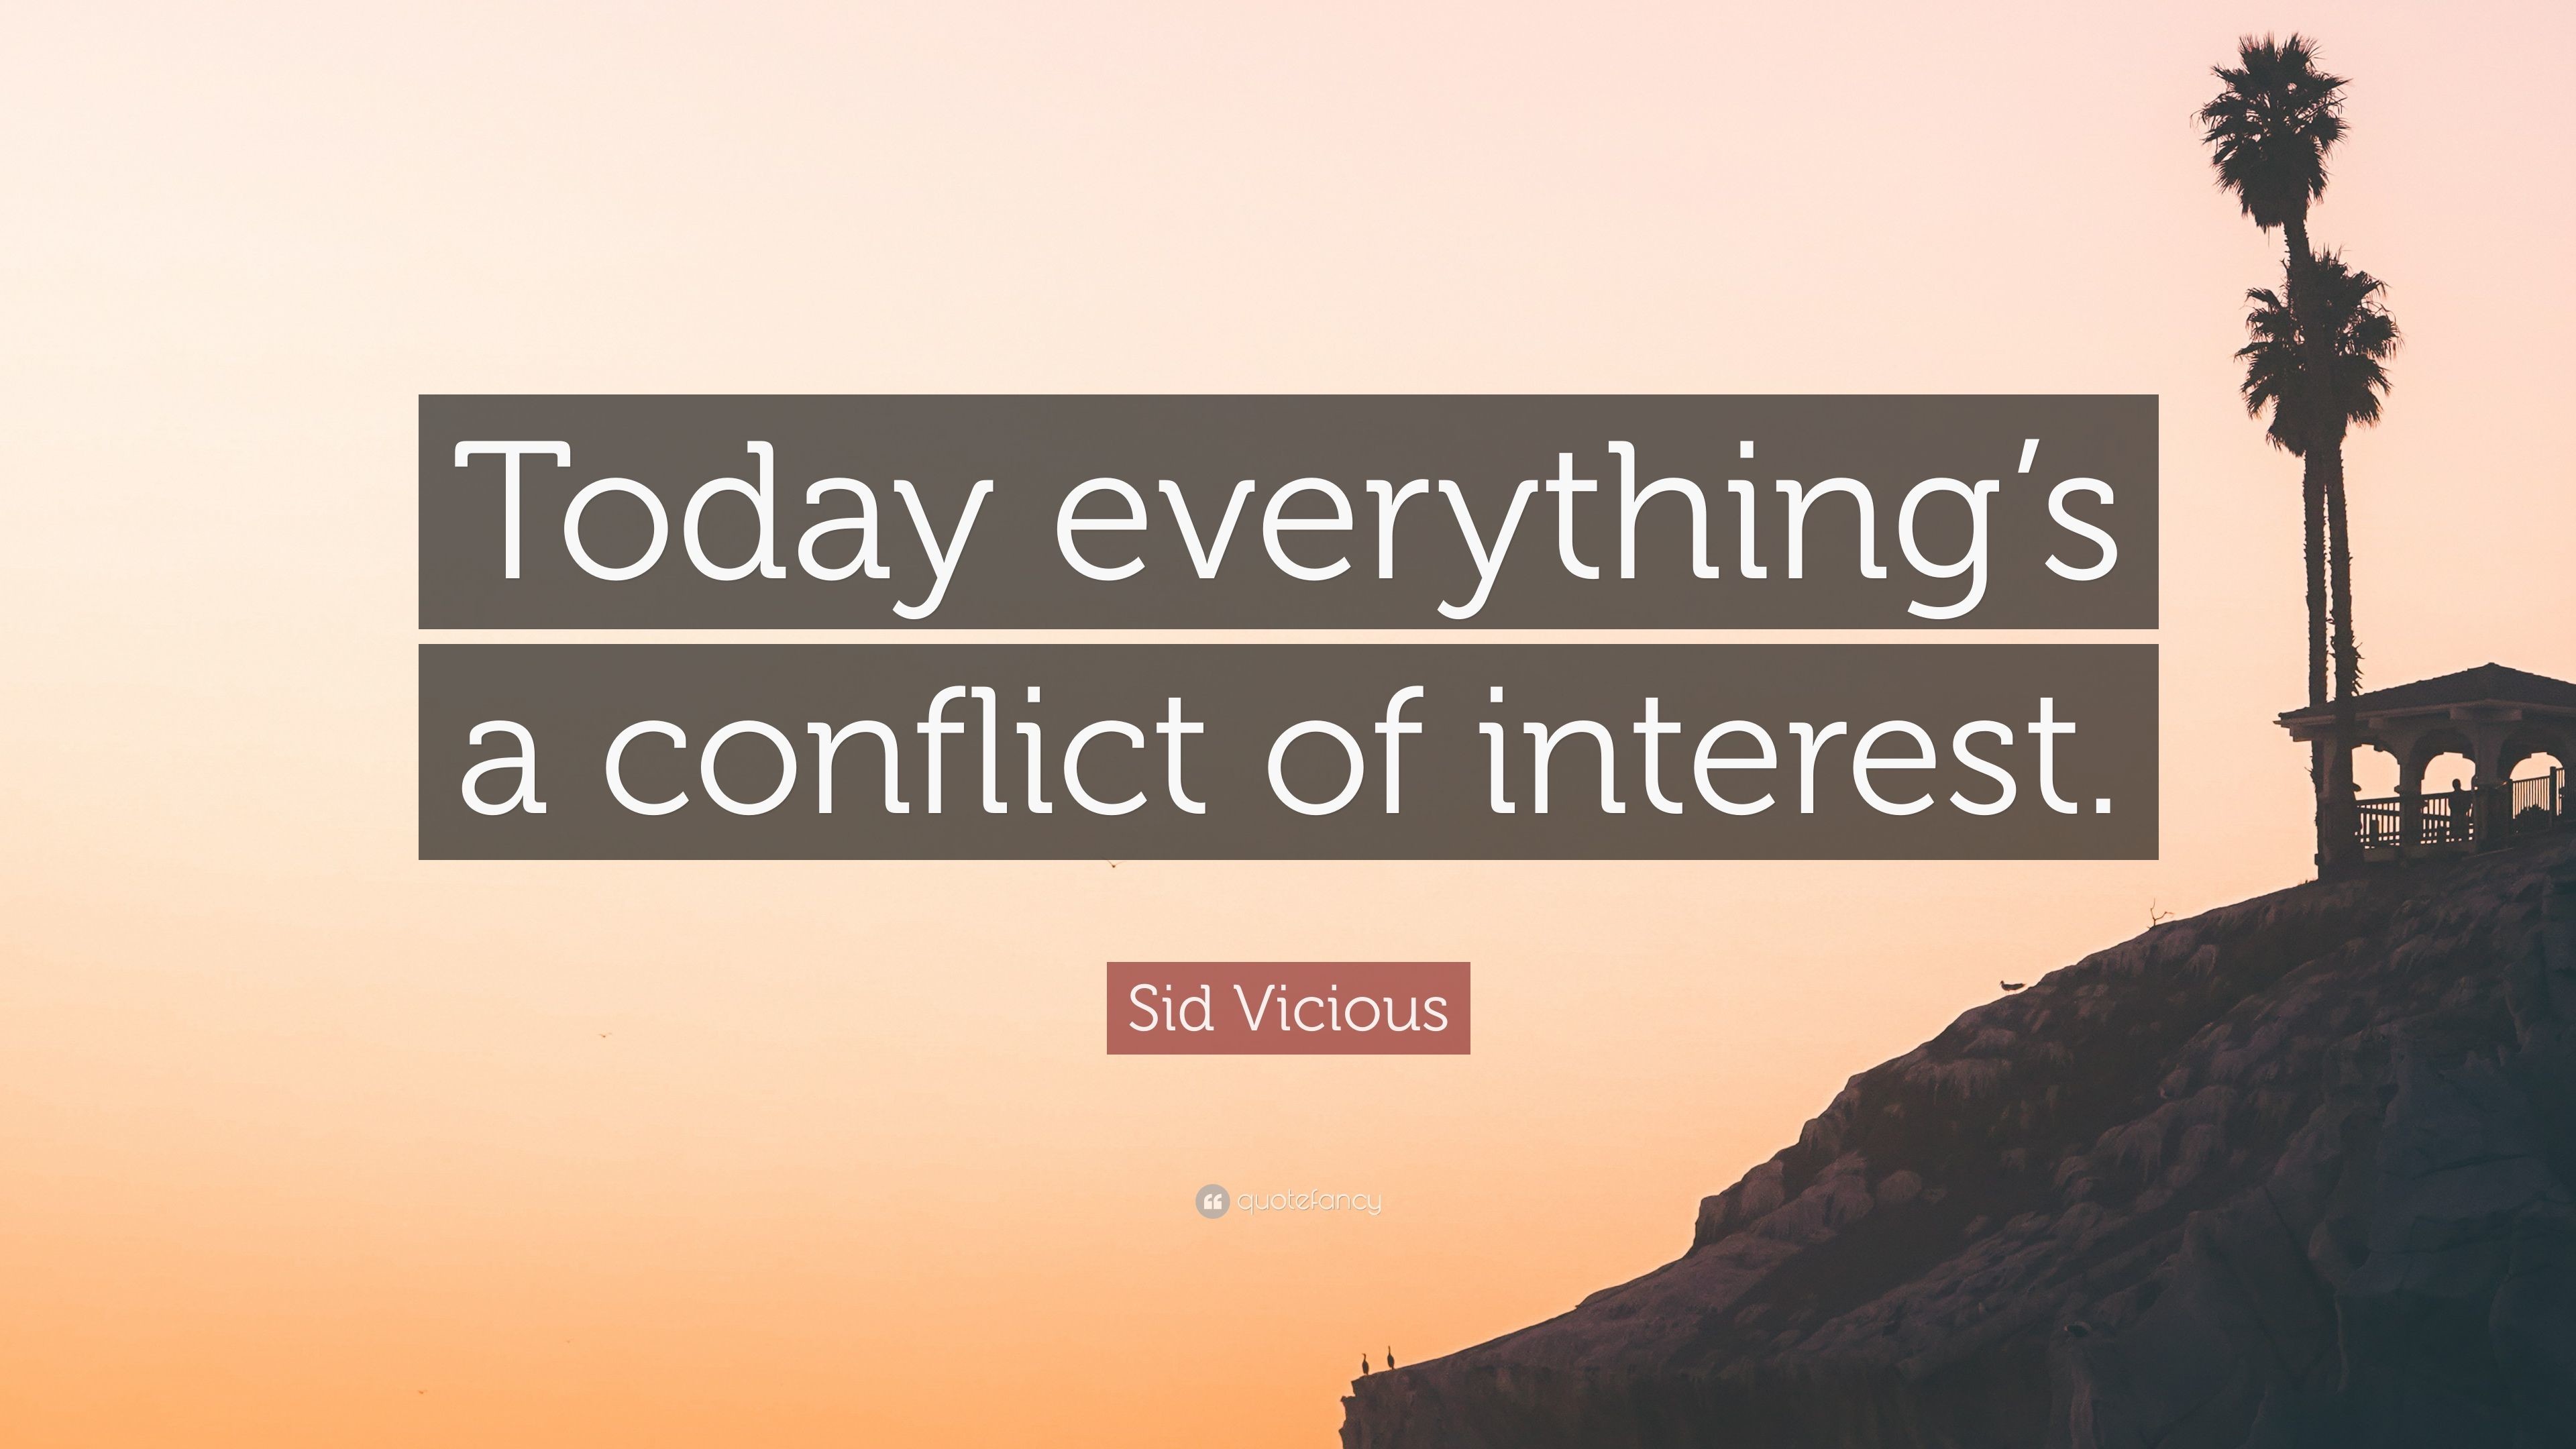 3840x2160 Sid Vicious Quote: “Today everything's a conflict of interest.”